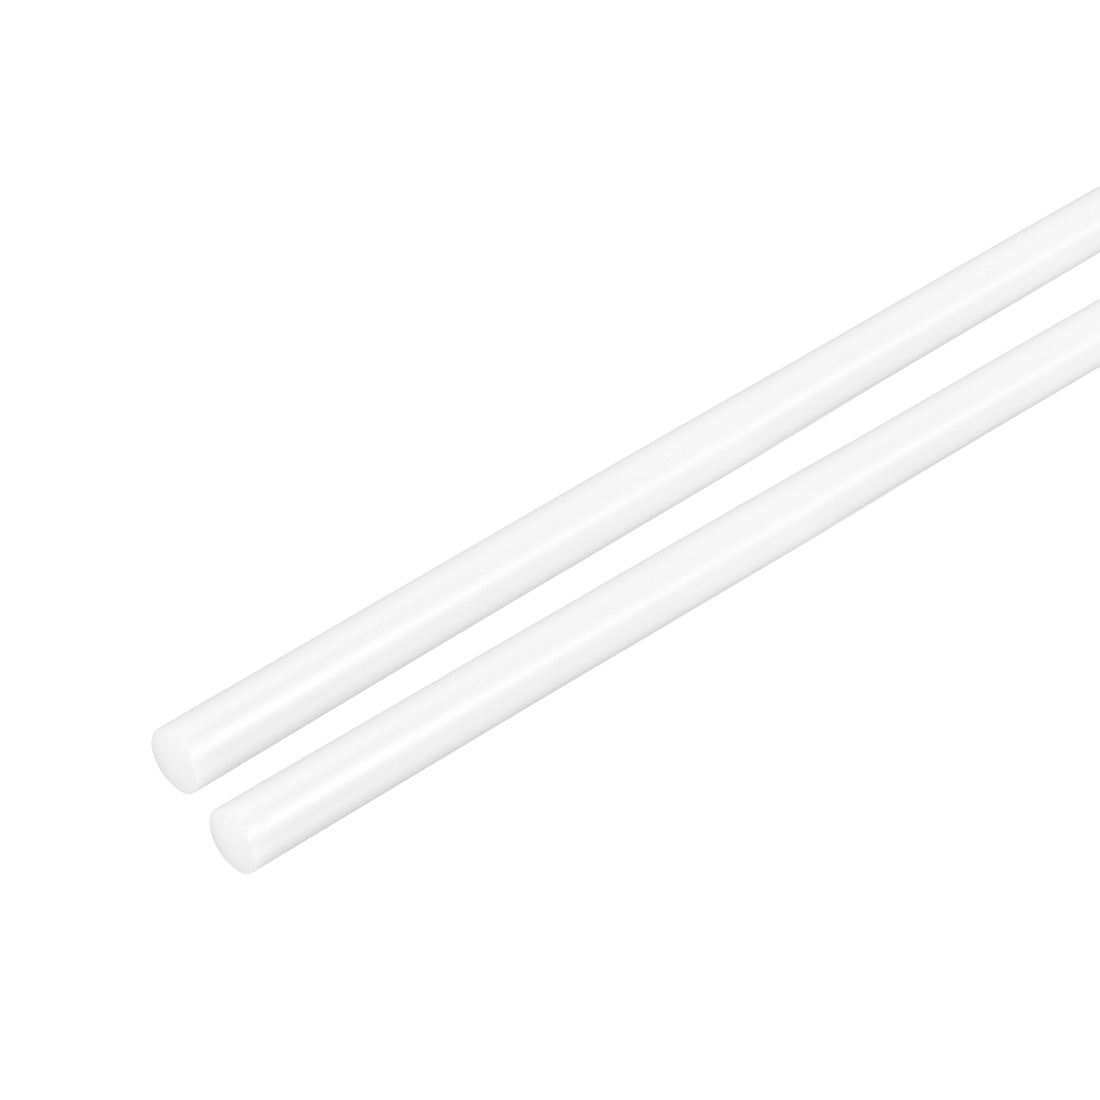 uxcell Uxcell Plastic Round Rod,3mm Dia 50cm White Engineering Plastic Round Bar 2pcs